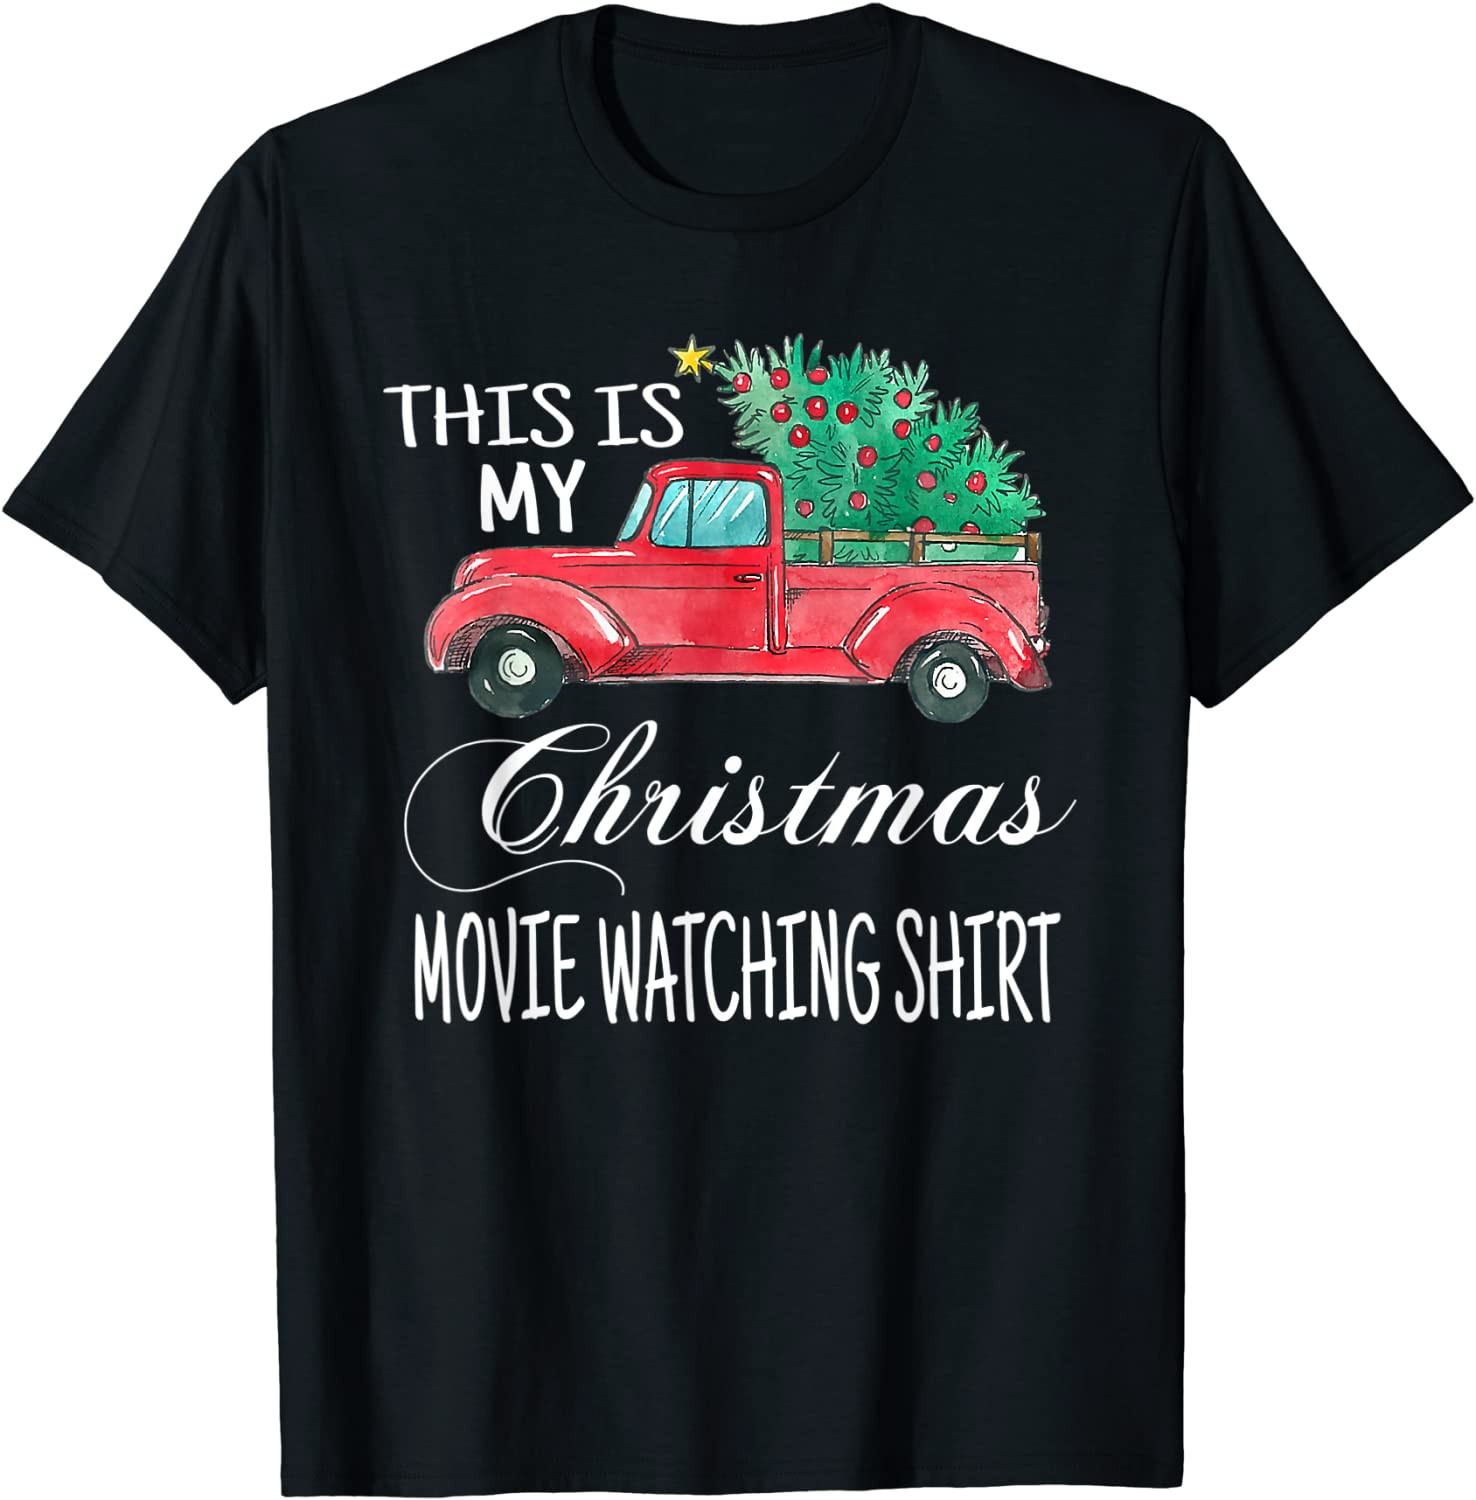 This Is My Christmas Movie Watching With Vintage Truck T-Shirt